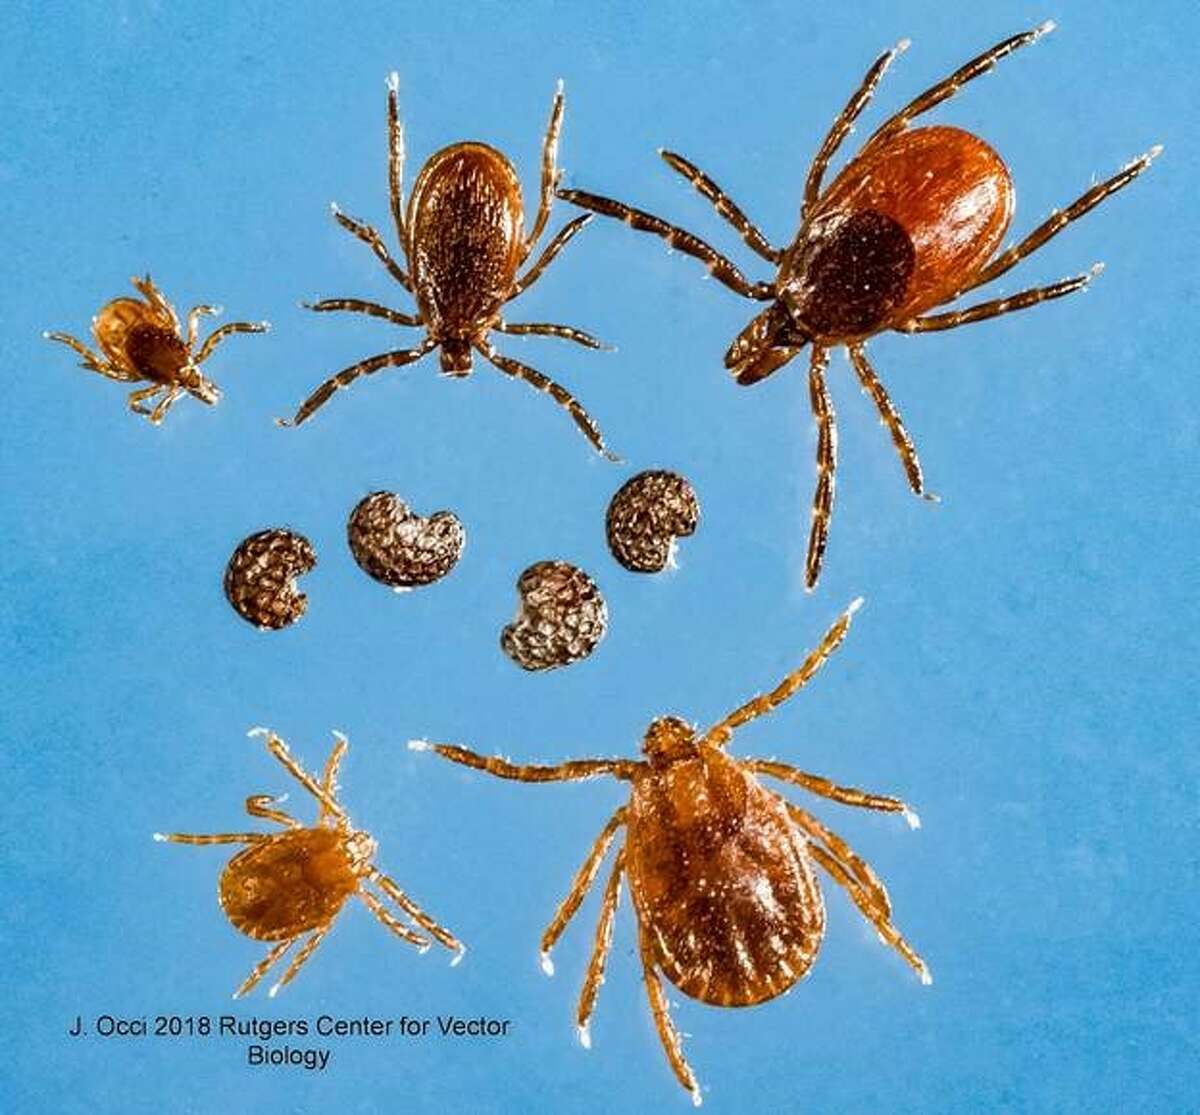 Top row: The black-legged/deer tick familyMiddle row: Poppy seeds Bottom row: Nymph and adult longhorned ticksSource: New York State Department of Health